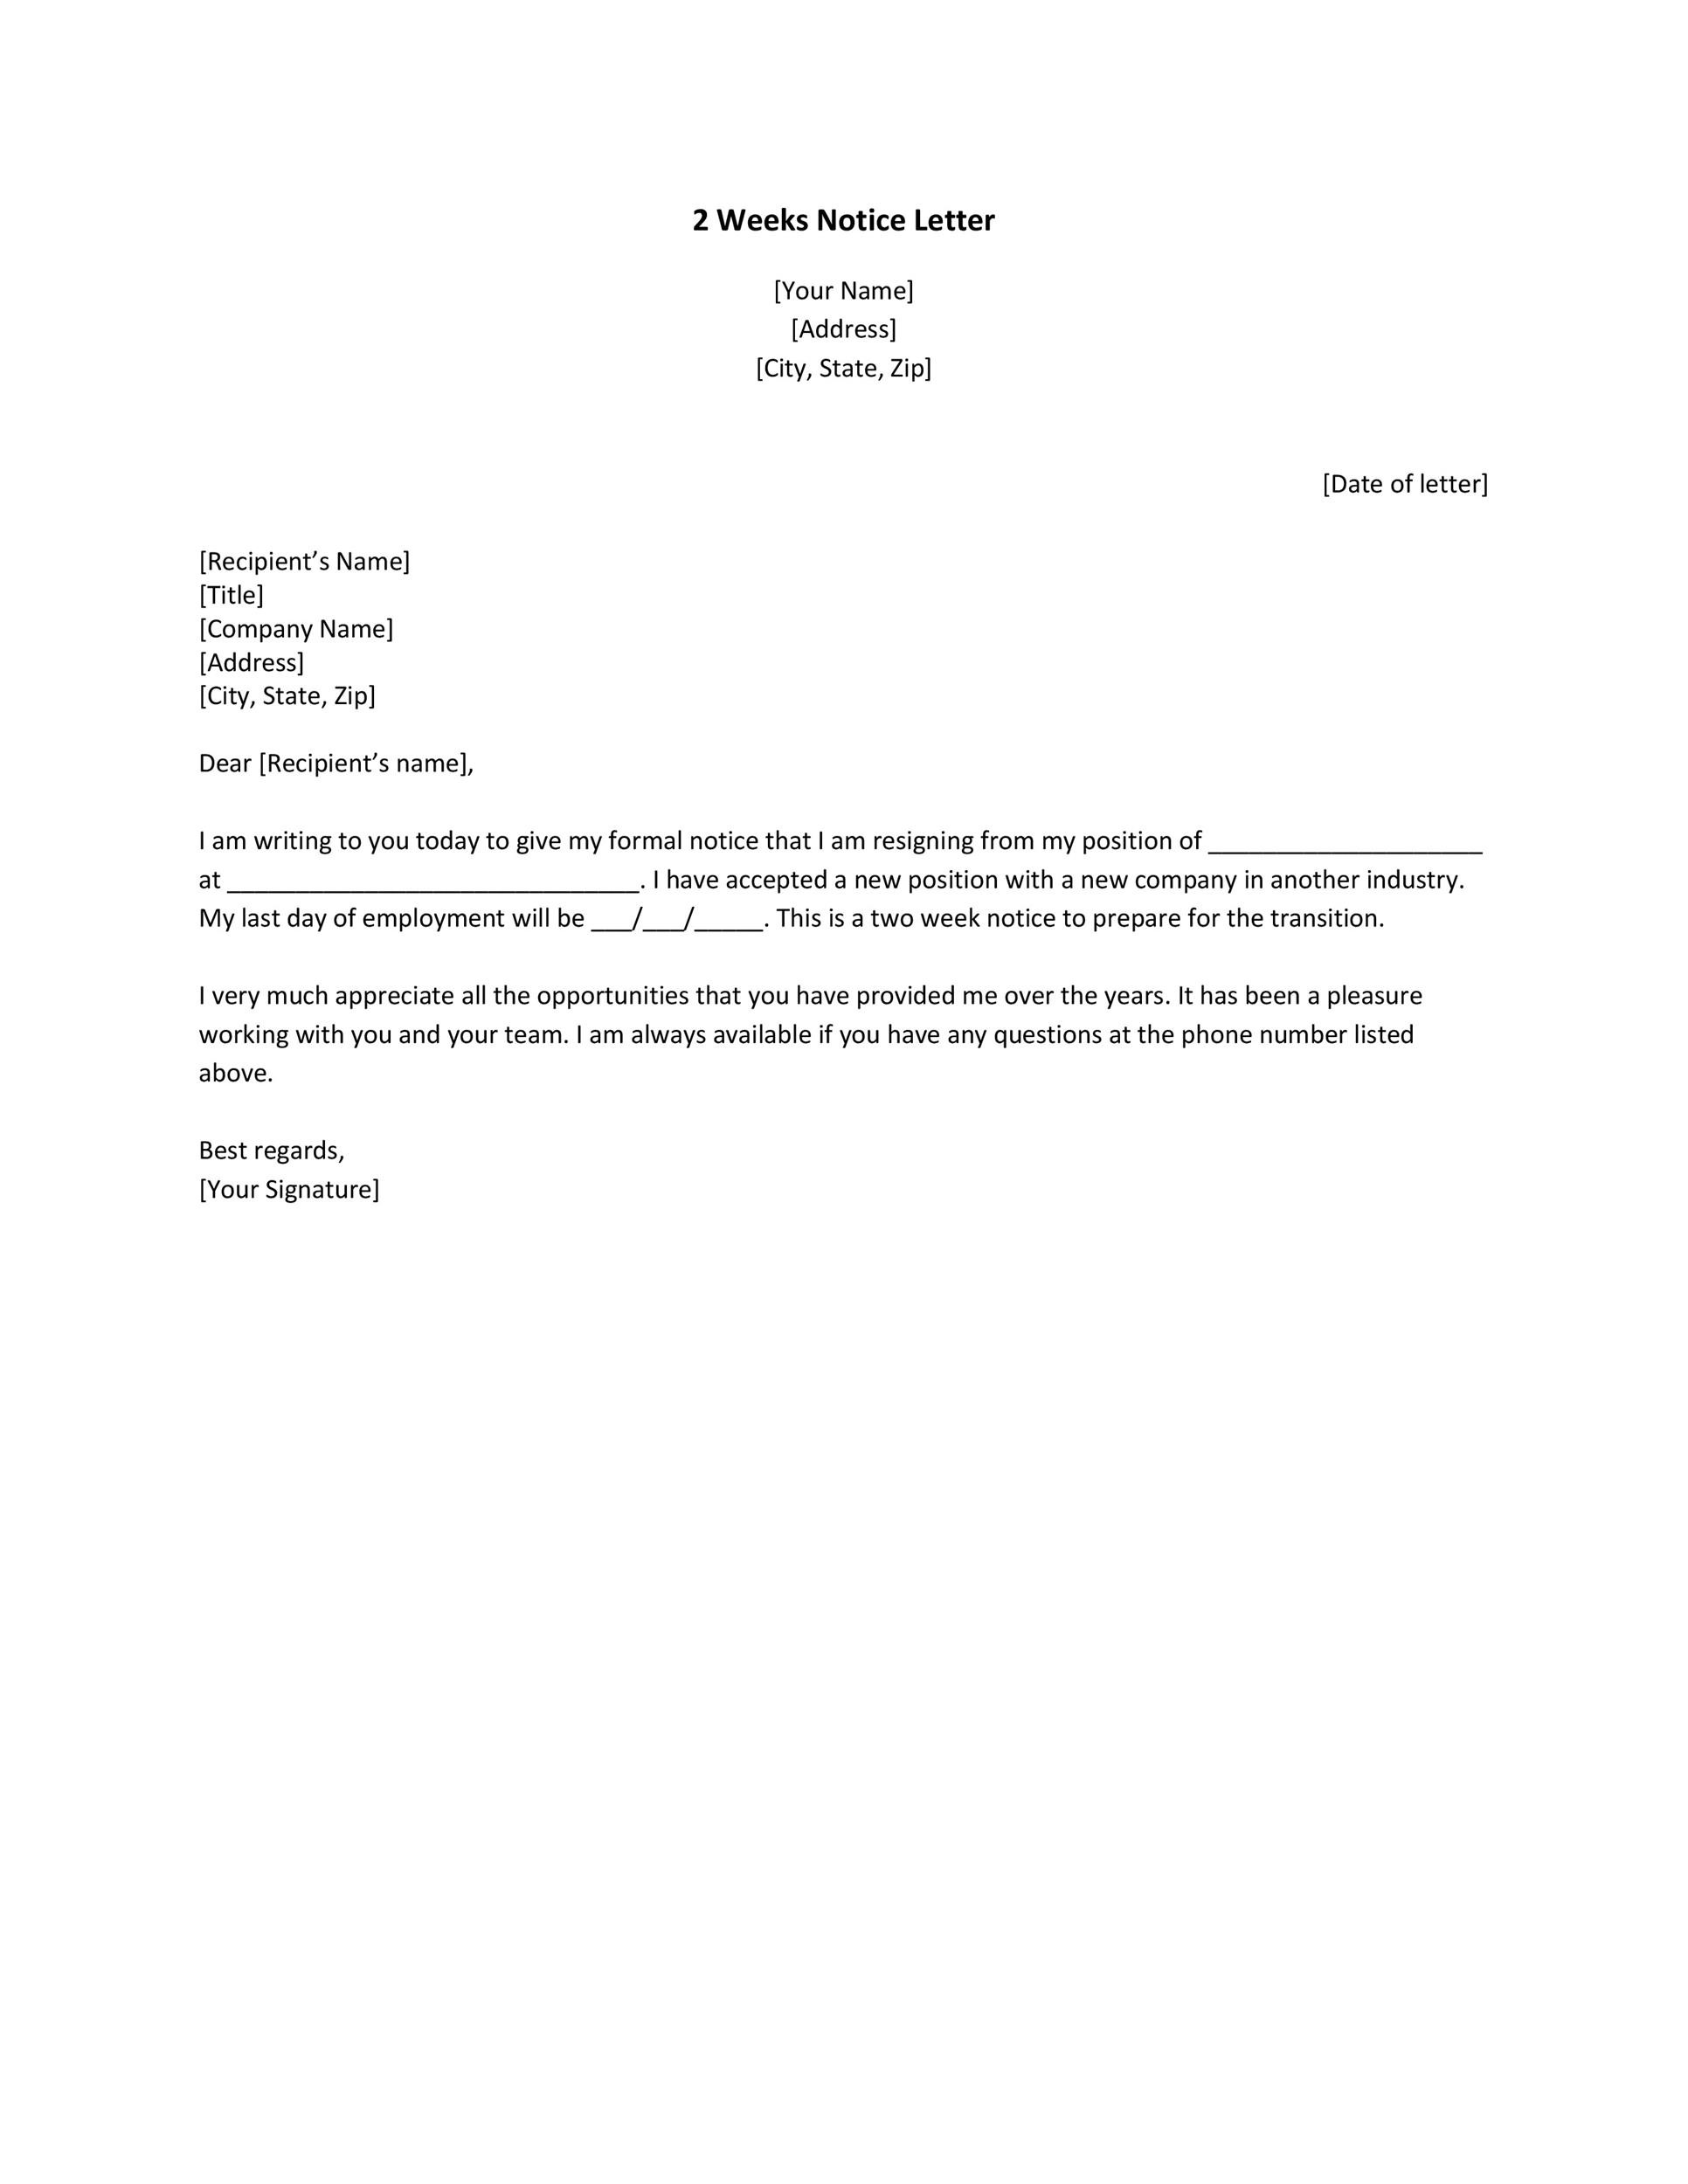 Professional 2 Week Resignation Letter from templatelab.com